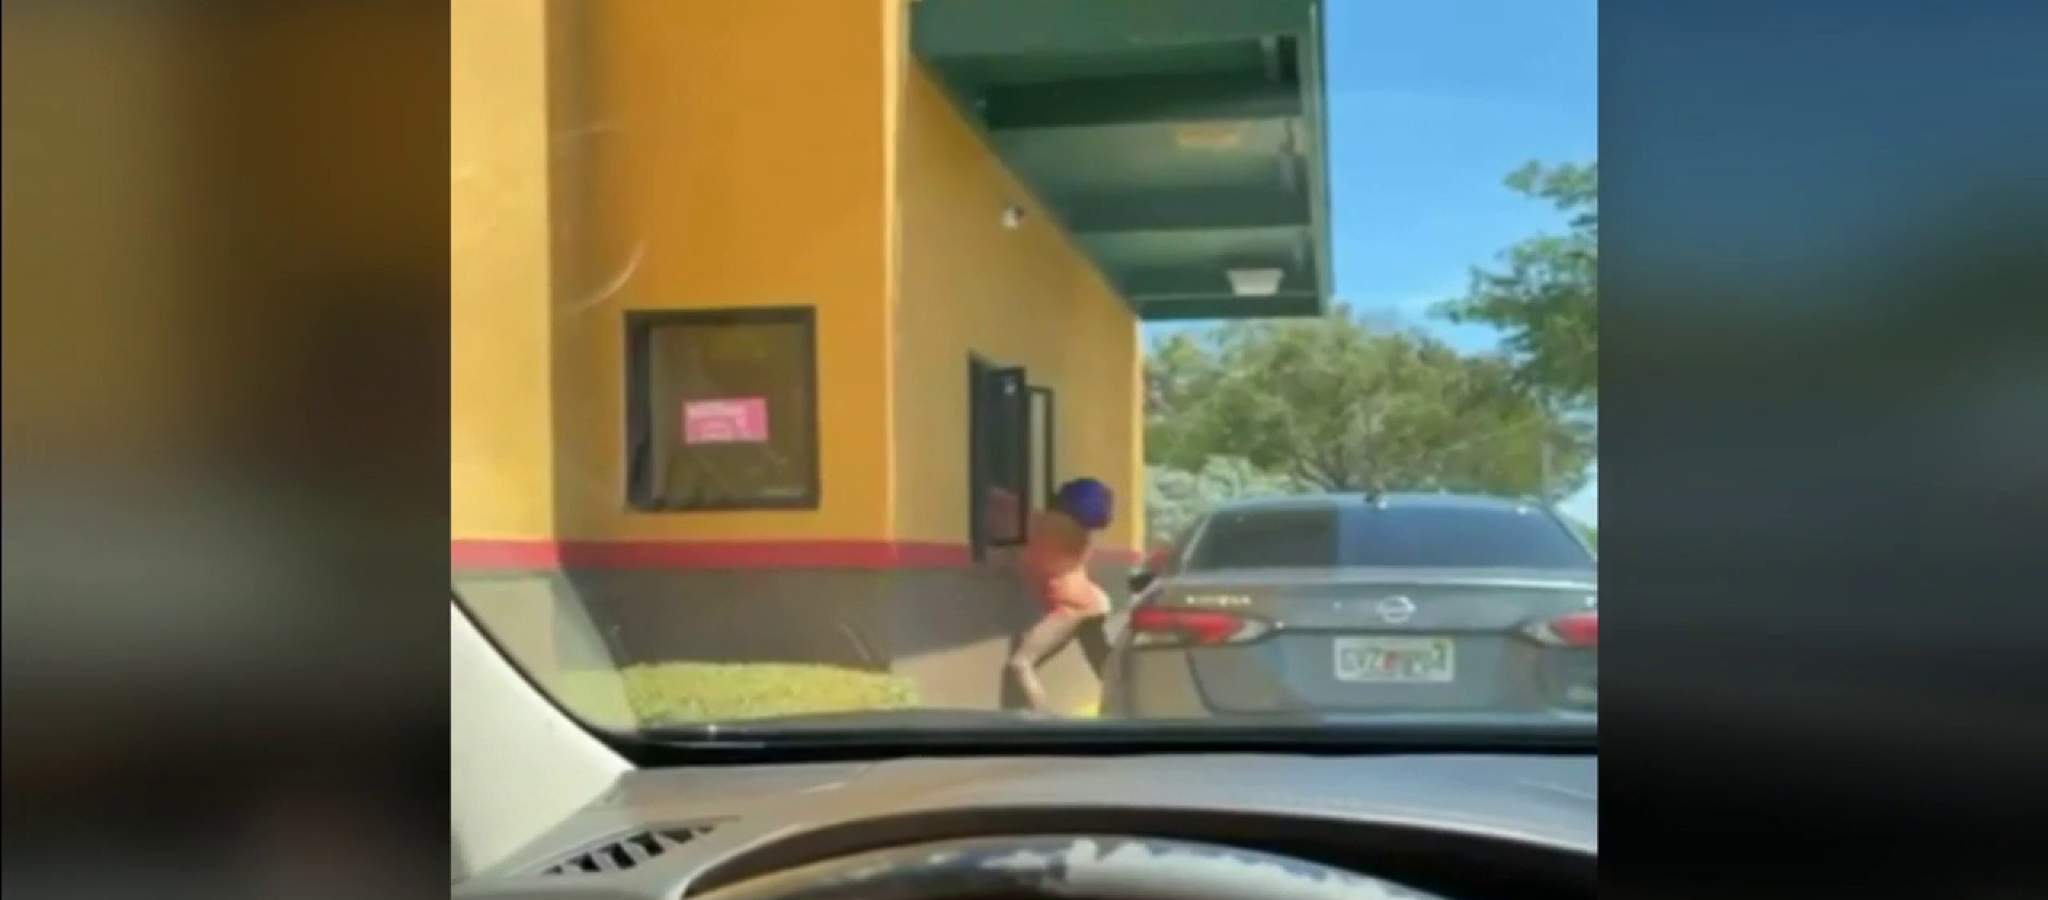 VIDEO: Women attack employees during robbery at Popeyes drive-thru